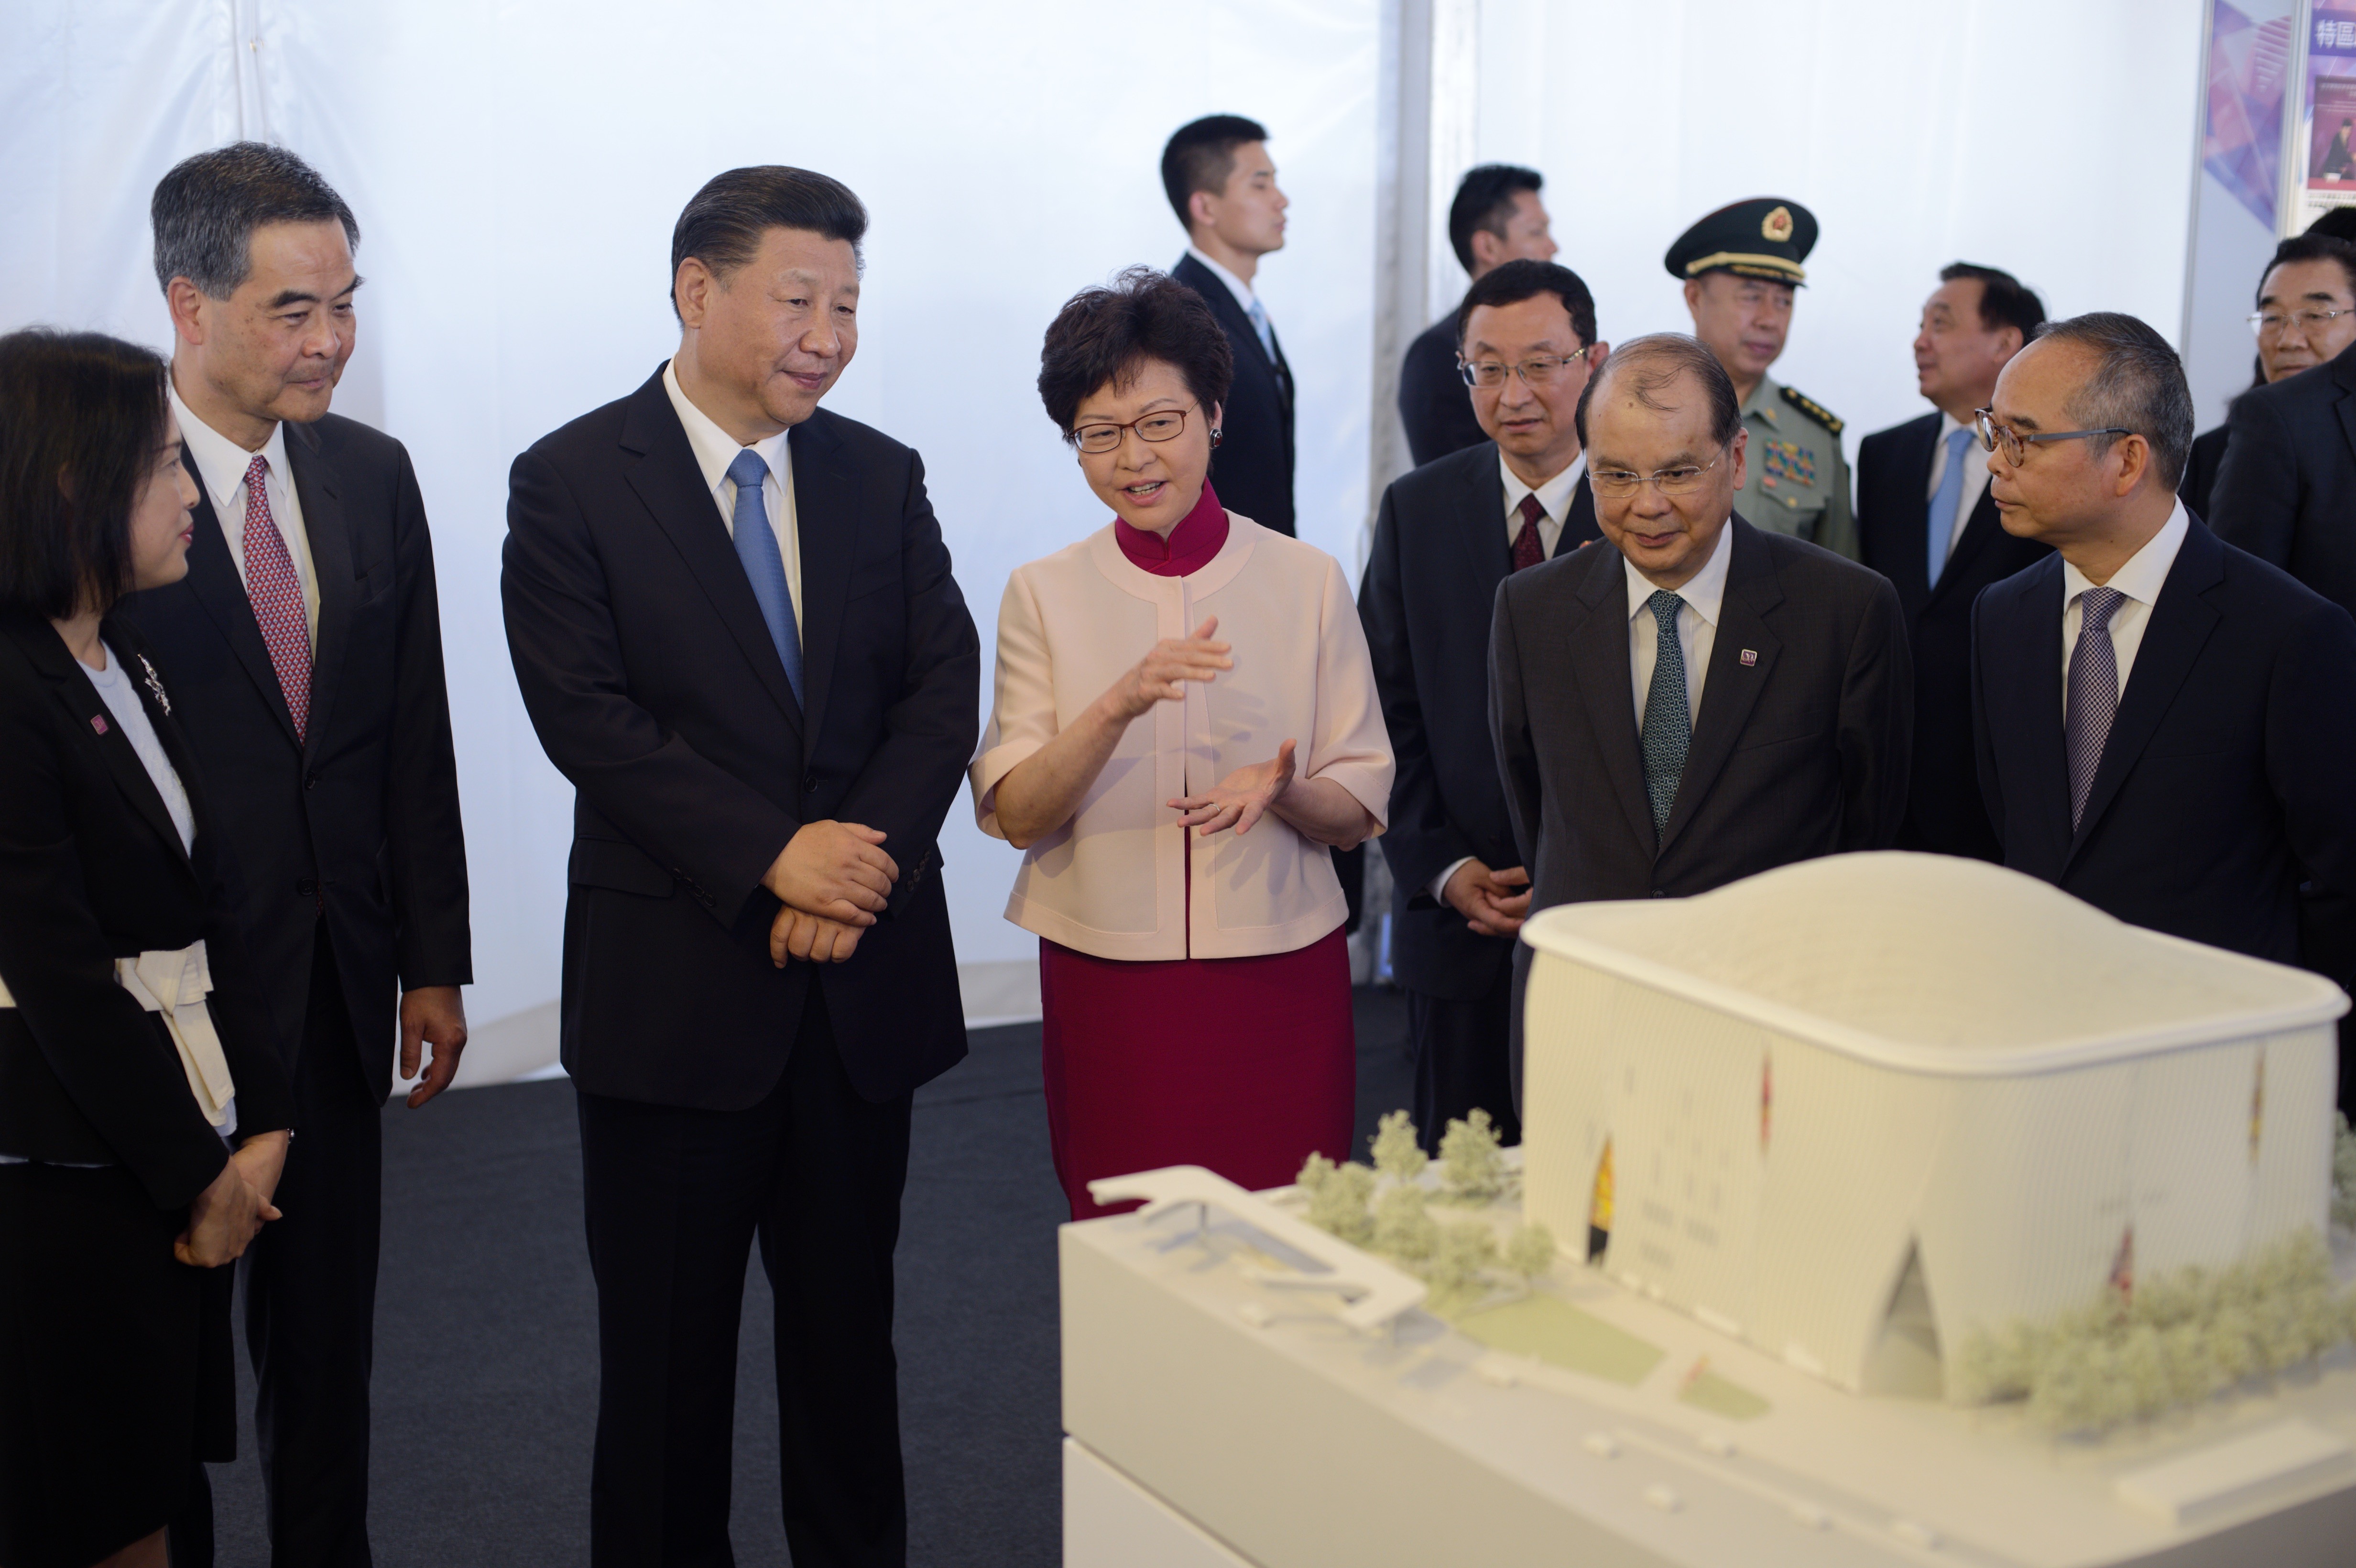 (Left to right): Chief Executive Leung Chun Ying; Chinese President Xi Jinping; Chief Executive-elect Carrie Lam Cheng Yuet-ngor; and Chief Secretary for Administration Matthew Cheung Kin-chung attend the signing ceremony of the Palace Museum at the West Kowloon Cultural District. Photo: SCMP